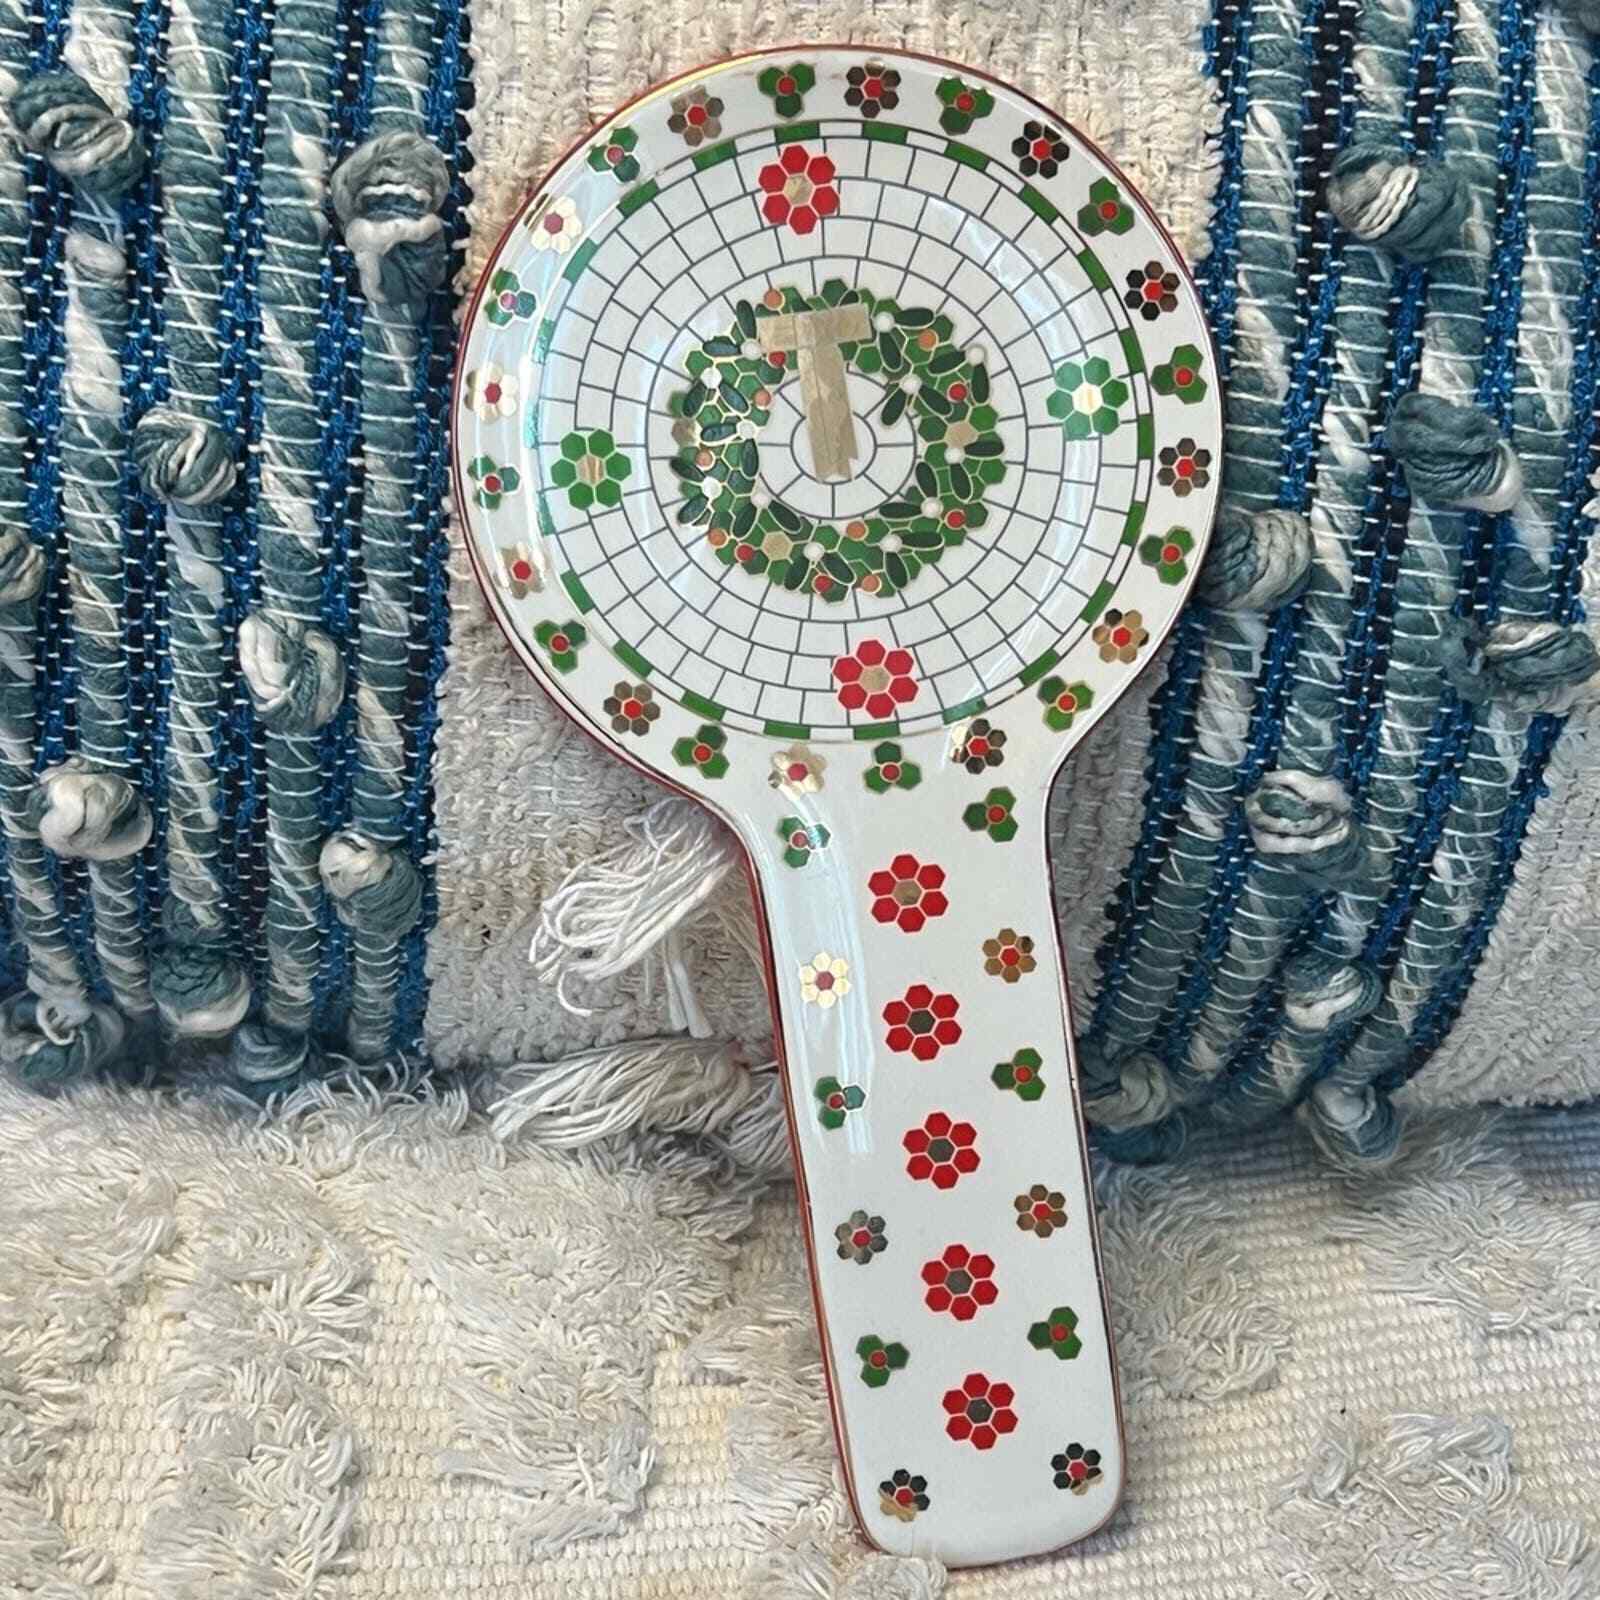 Anthropologie Festive Bistro Tile Spoon Rest Christmas Wreath Holly Floral